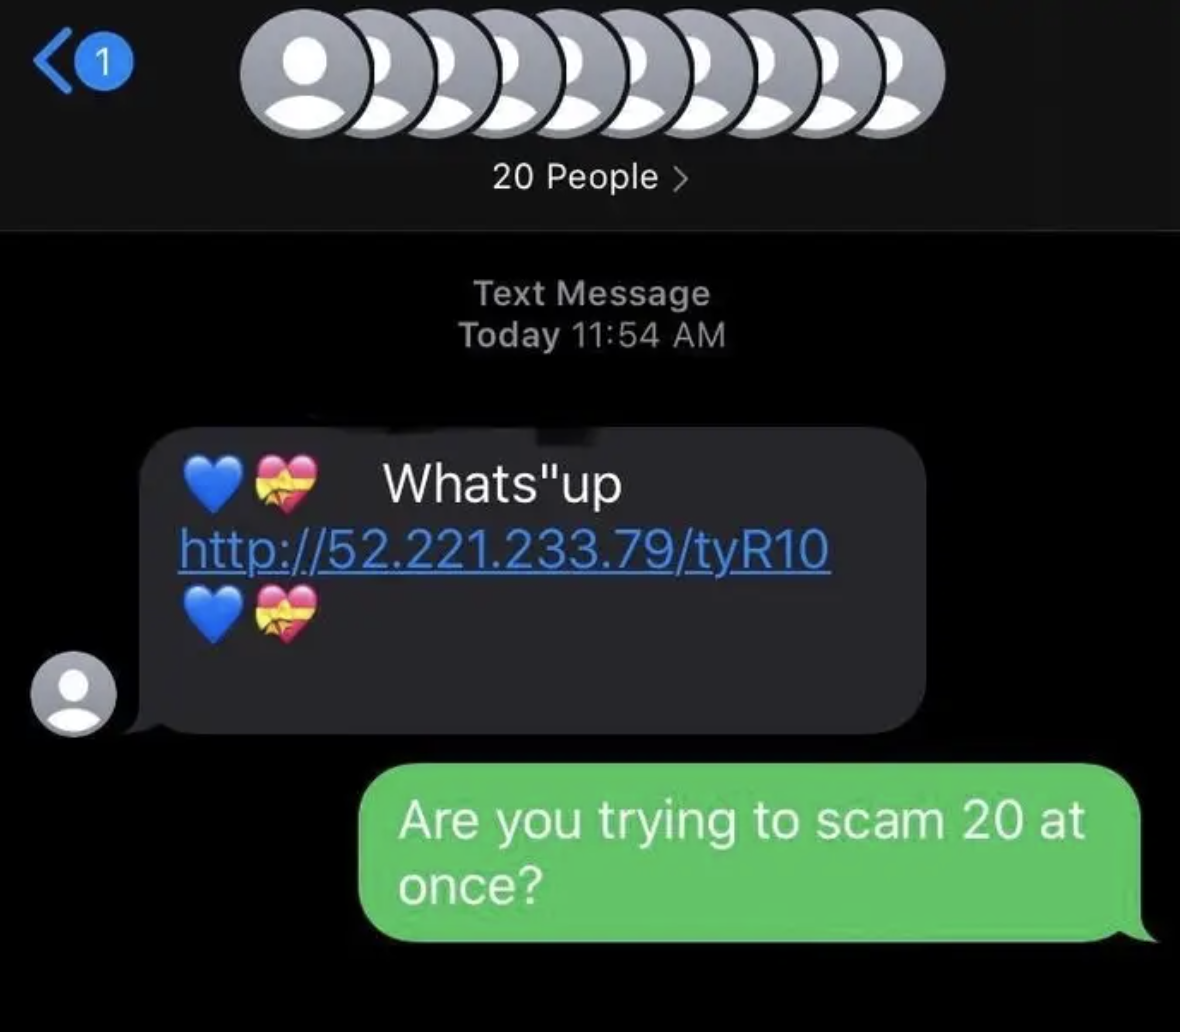 text of someone texting 200 people at once to scam them